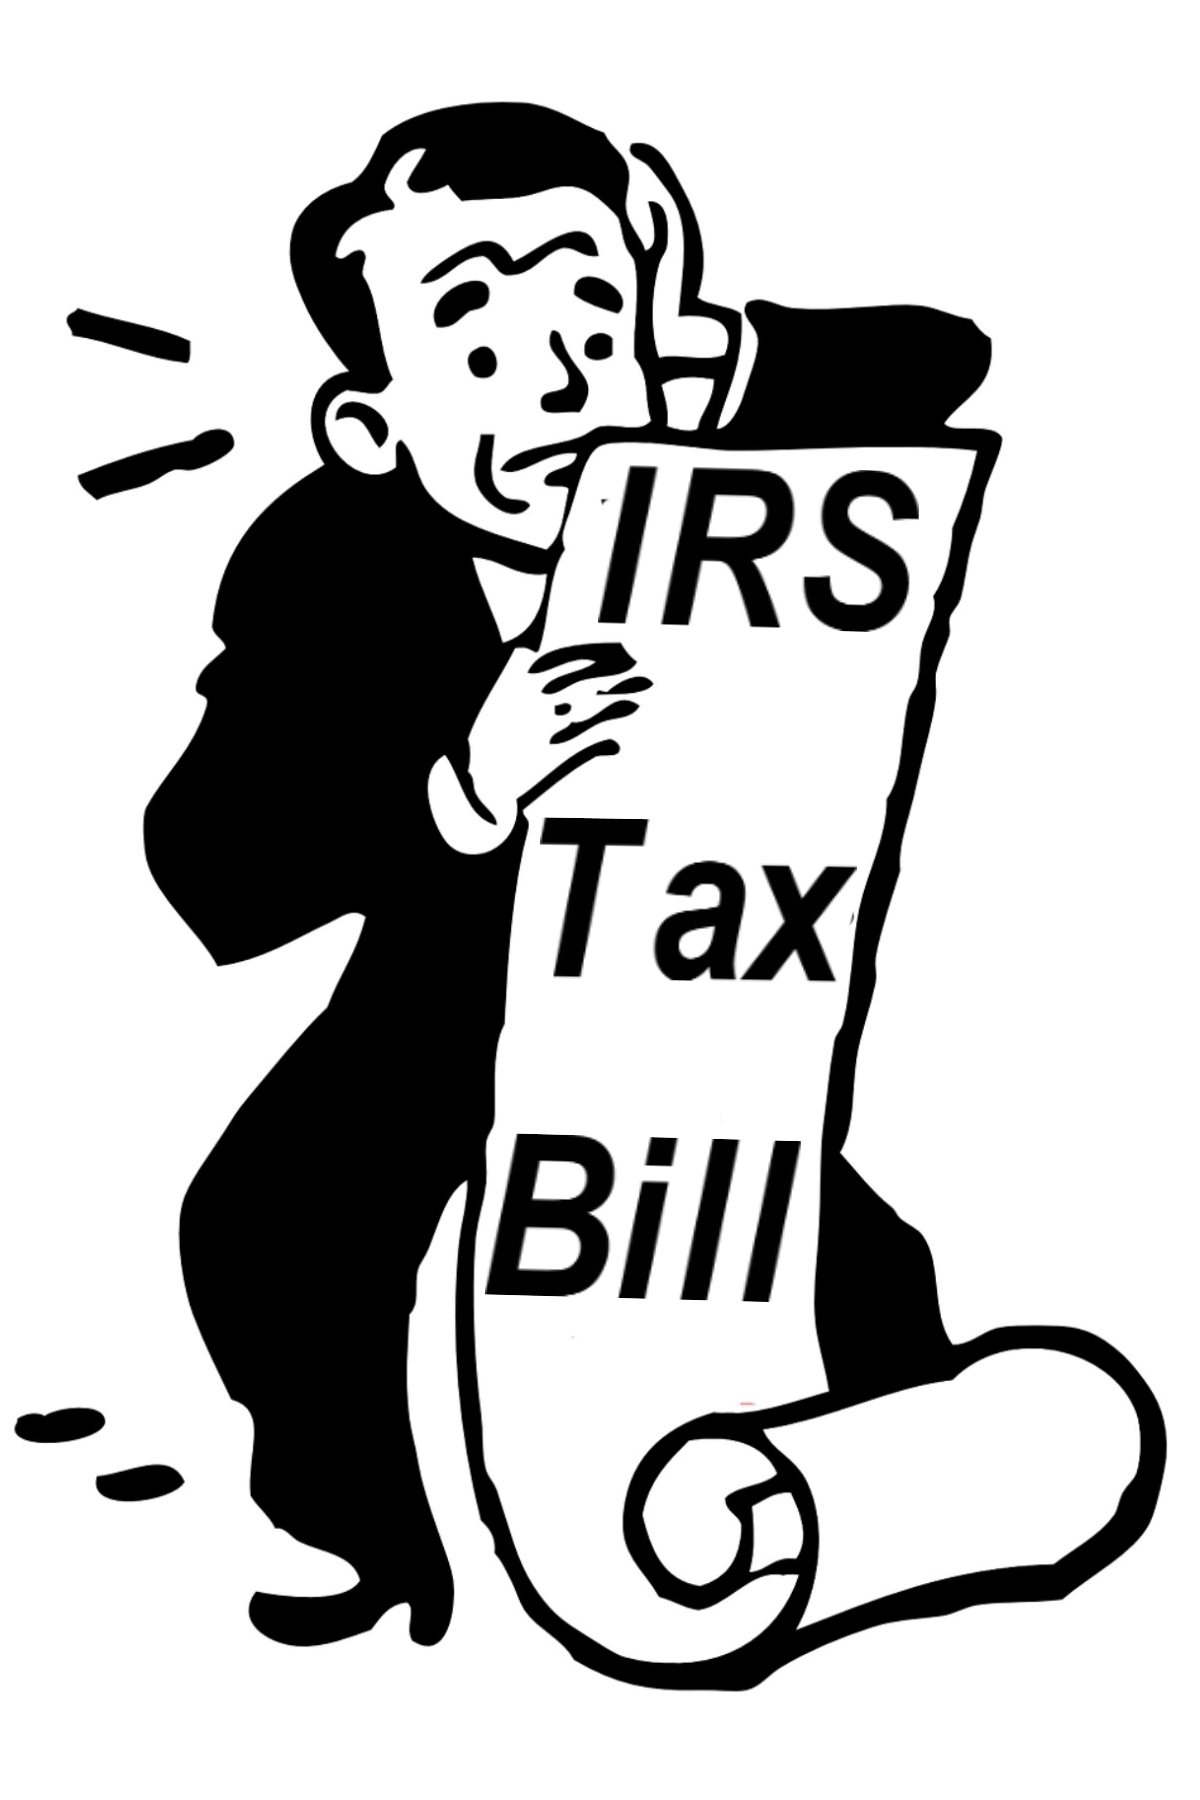 tax-debt-relief-tax-relief-back-taxes-pairettcpa